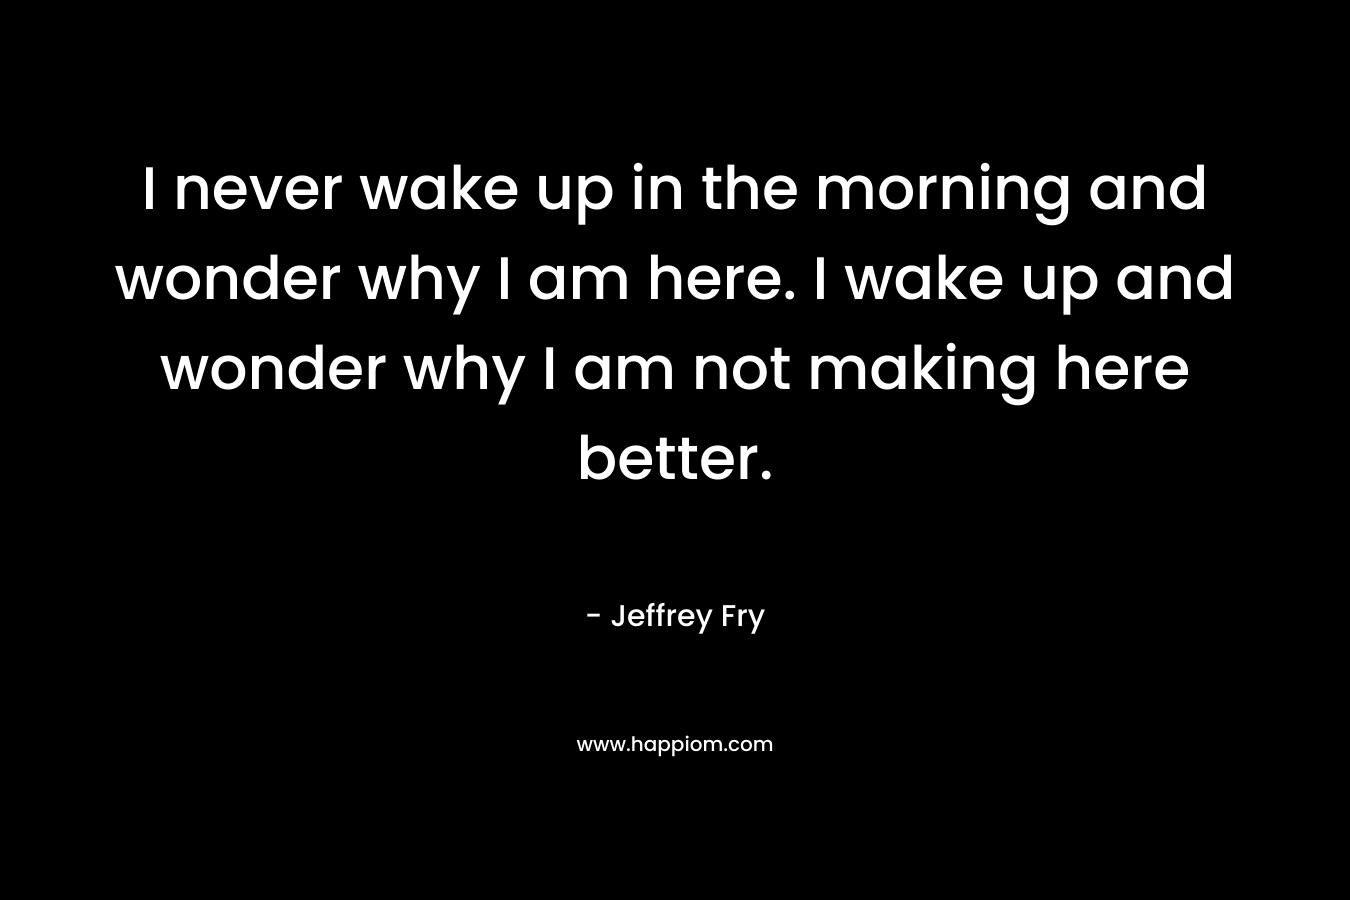 I never wake up in the morning and wonder why I am here. I wake up and wonder why I am not making here better.